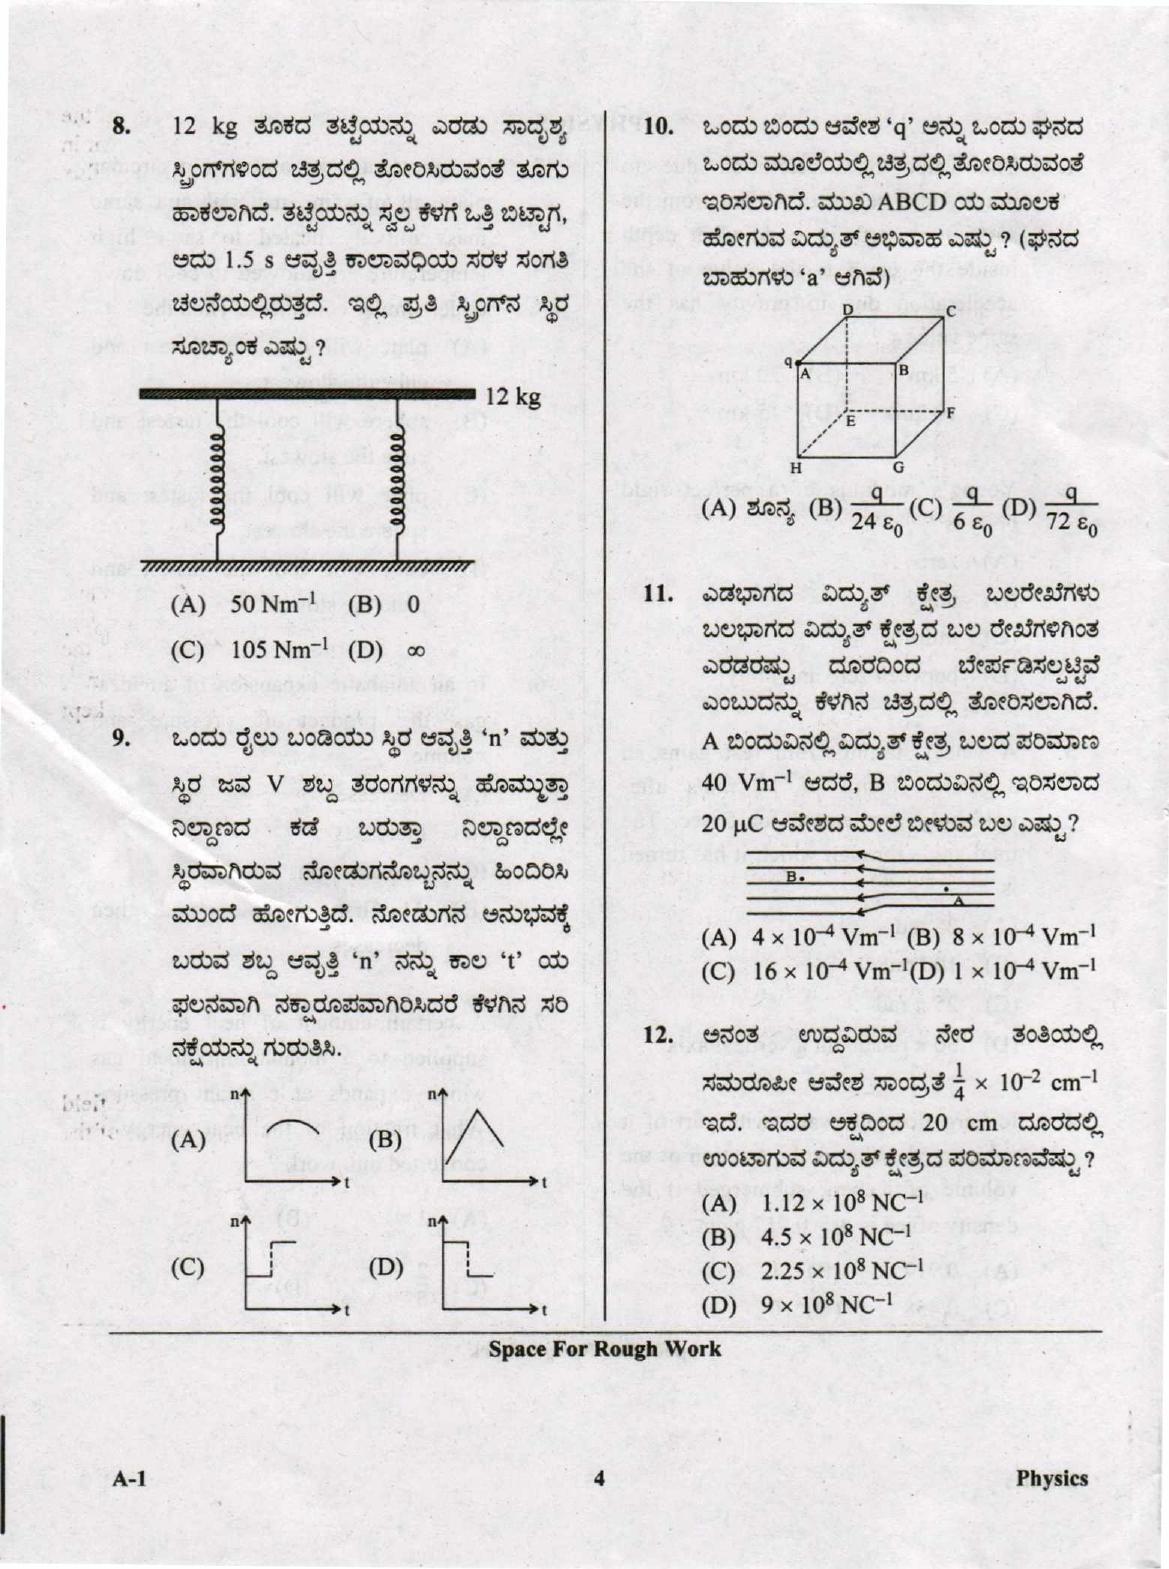 KCET Physics 2020 Question Papers - Page 4